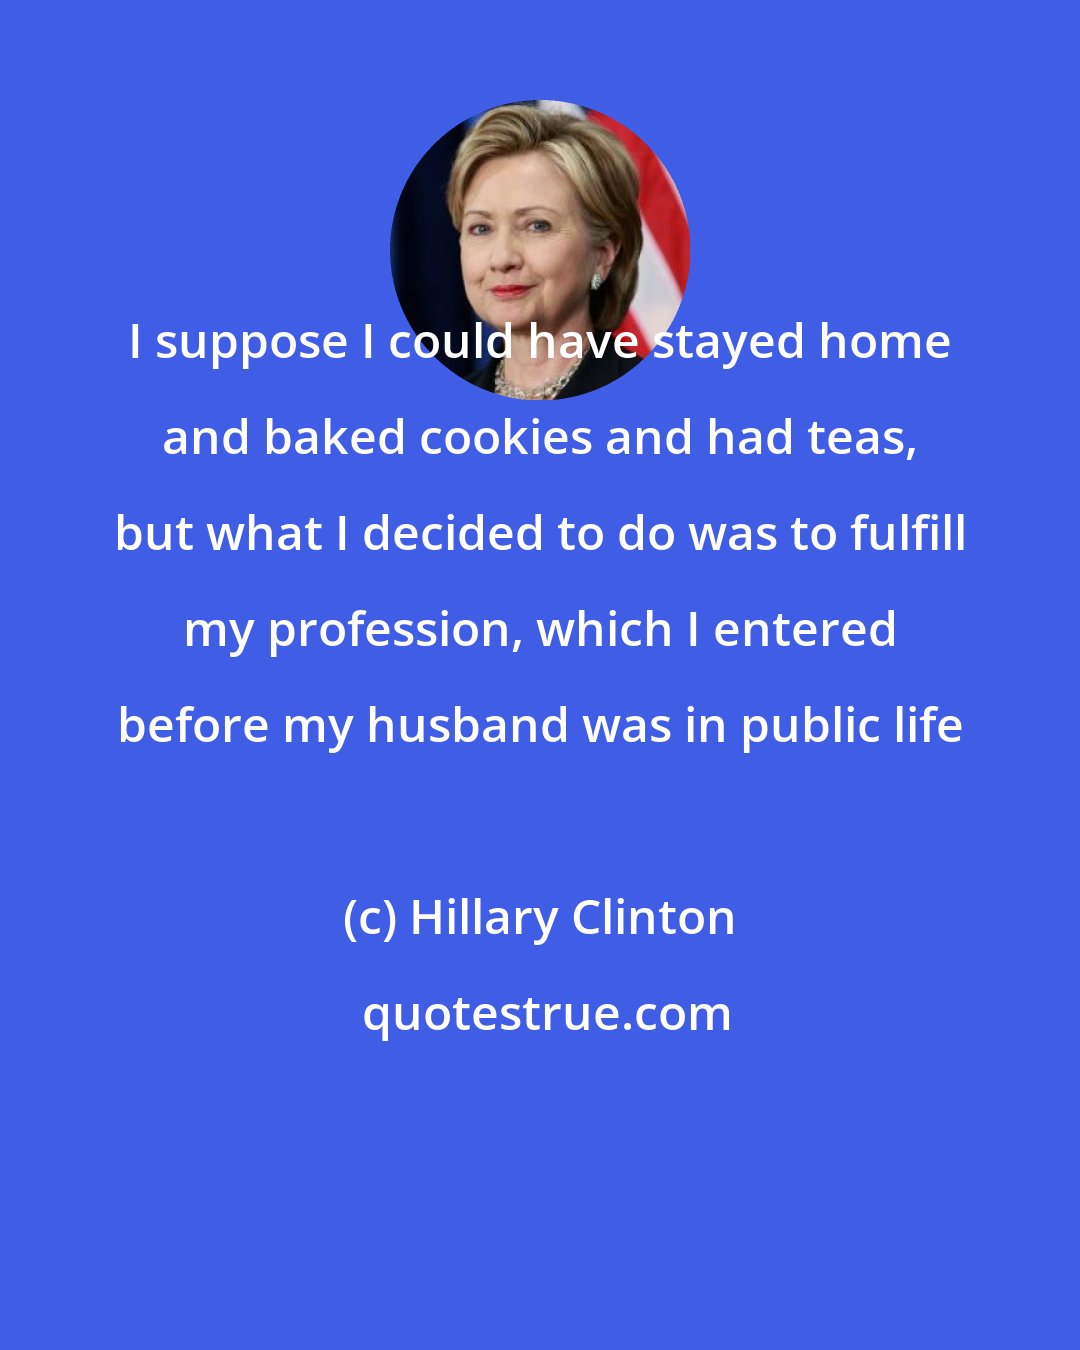 Hillary Clinton: I suppose I could have stayed home and baked cookies and had teas, but what I decided to do was to fulfill my profession, which I entered before my husband was in public life